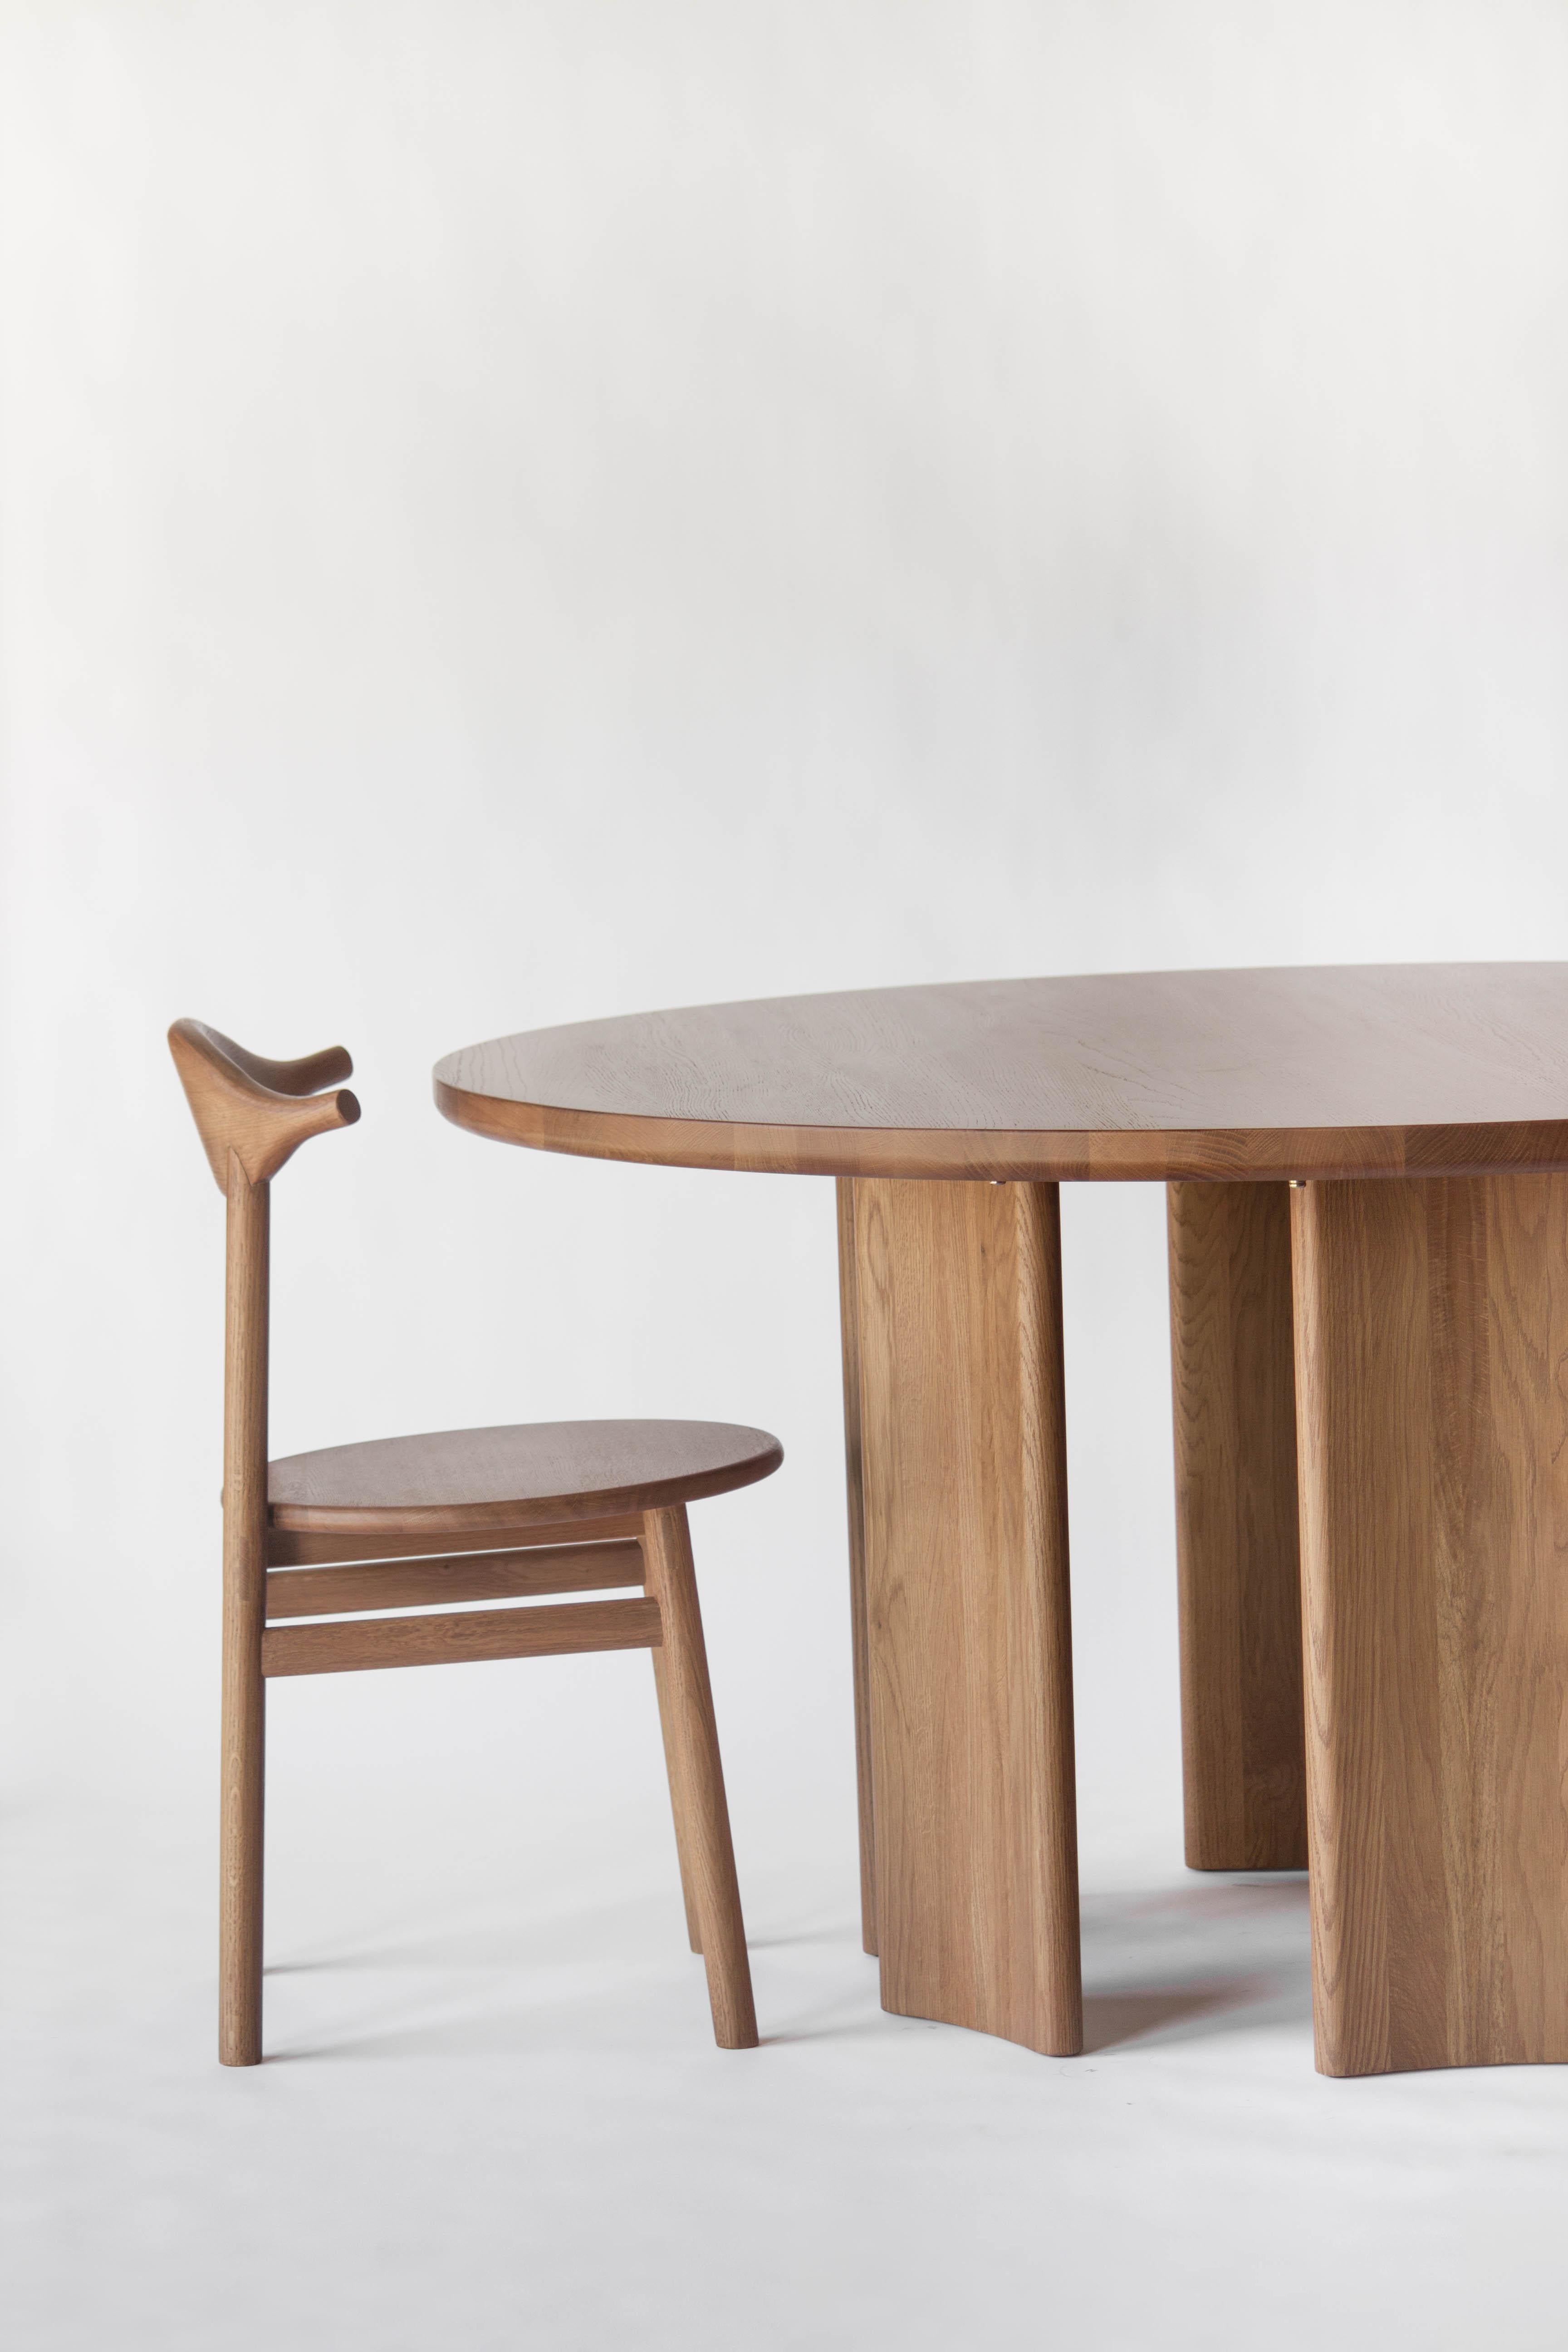 Crest Table Round in Sienna, Minimalist Dining Table in Wood In New Condition For Sale In San Jose, CA